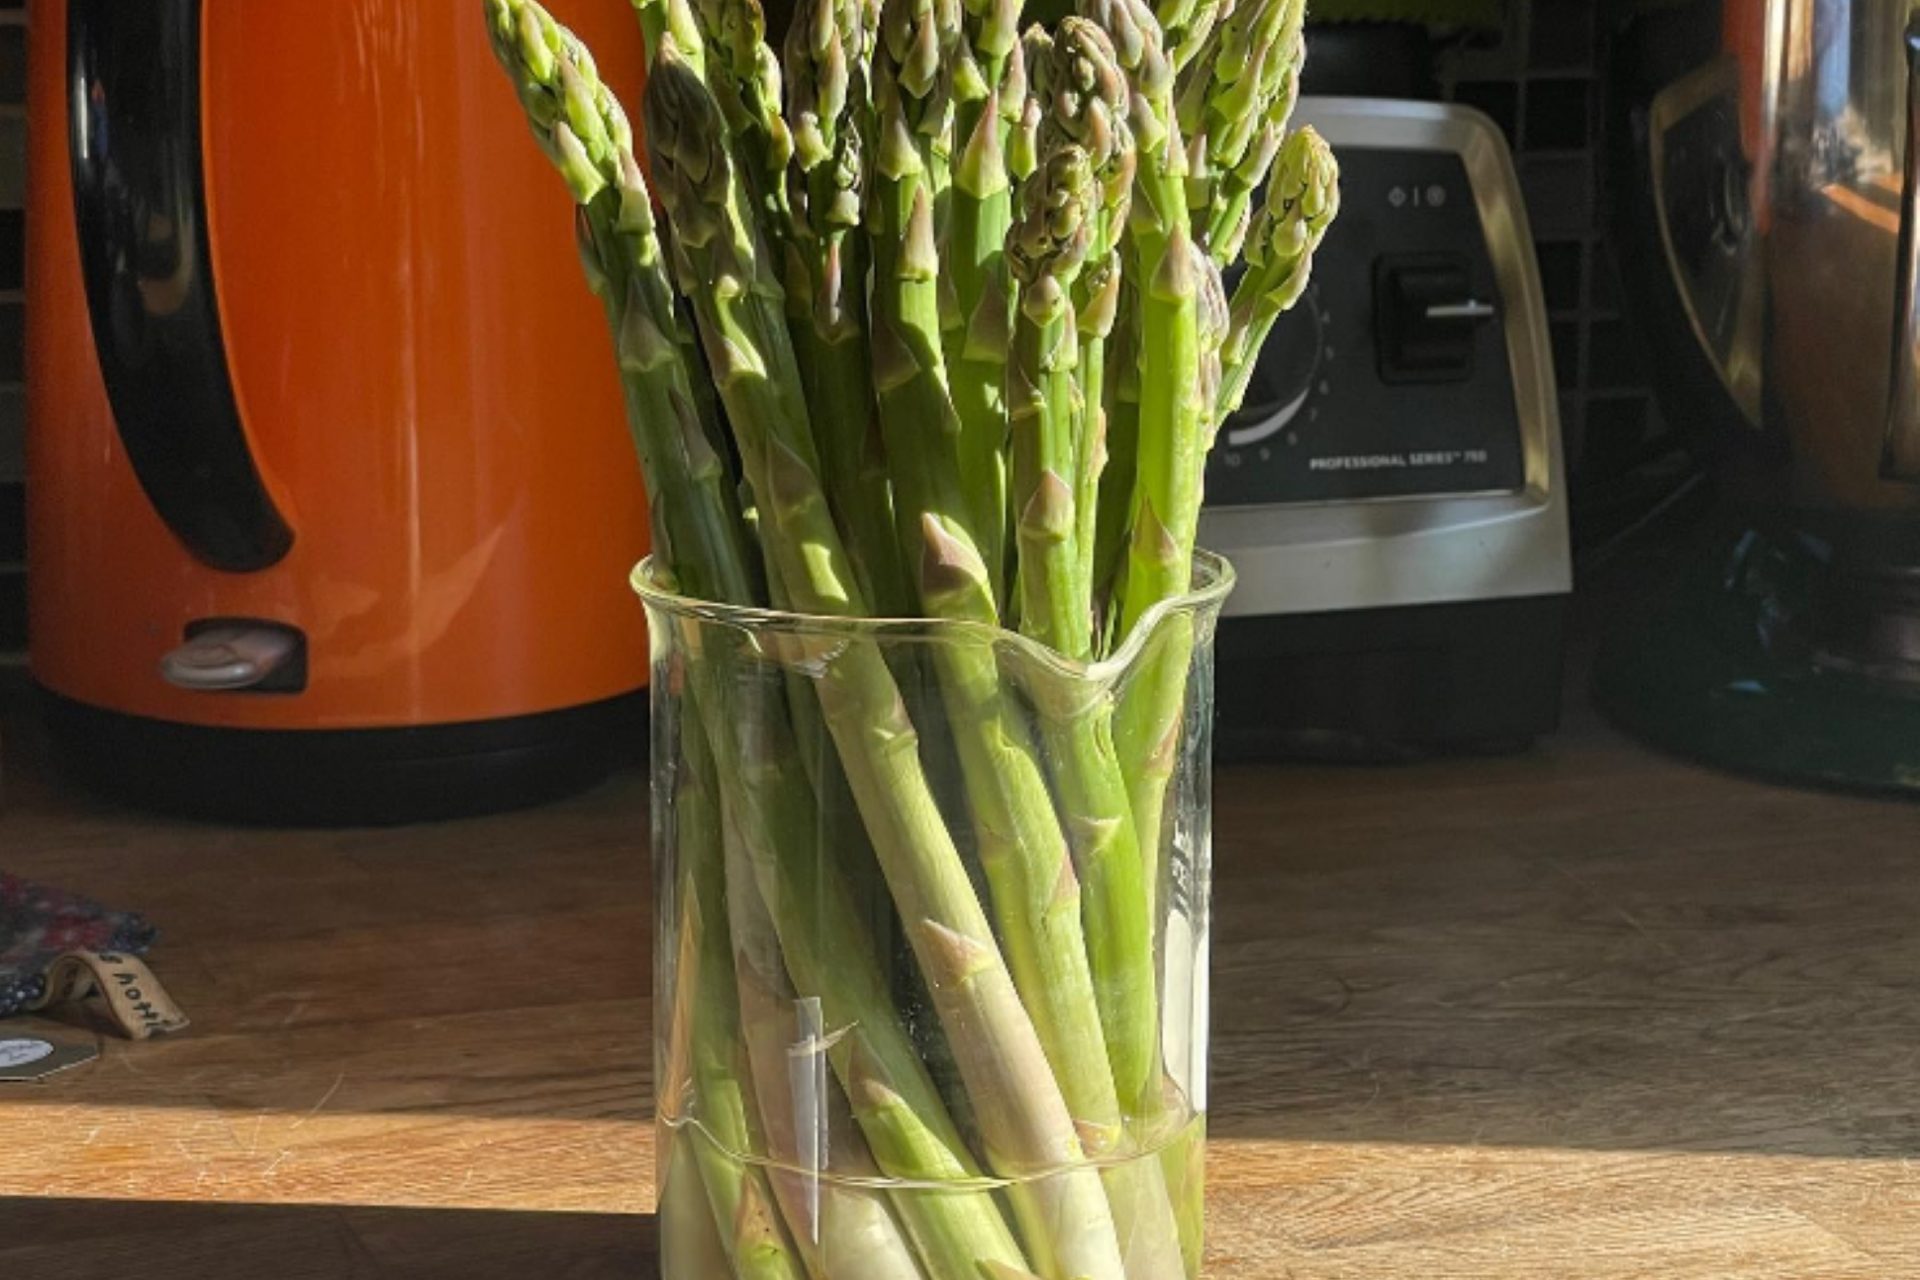 Asparagus: A glass of water 